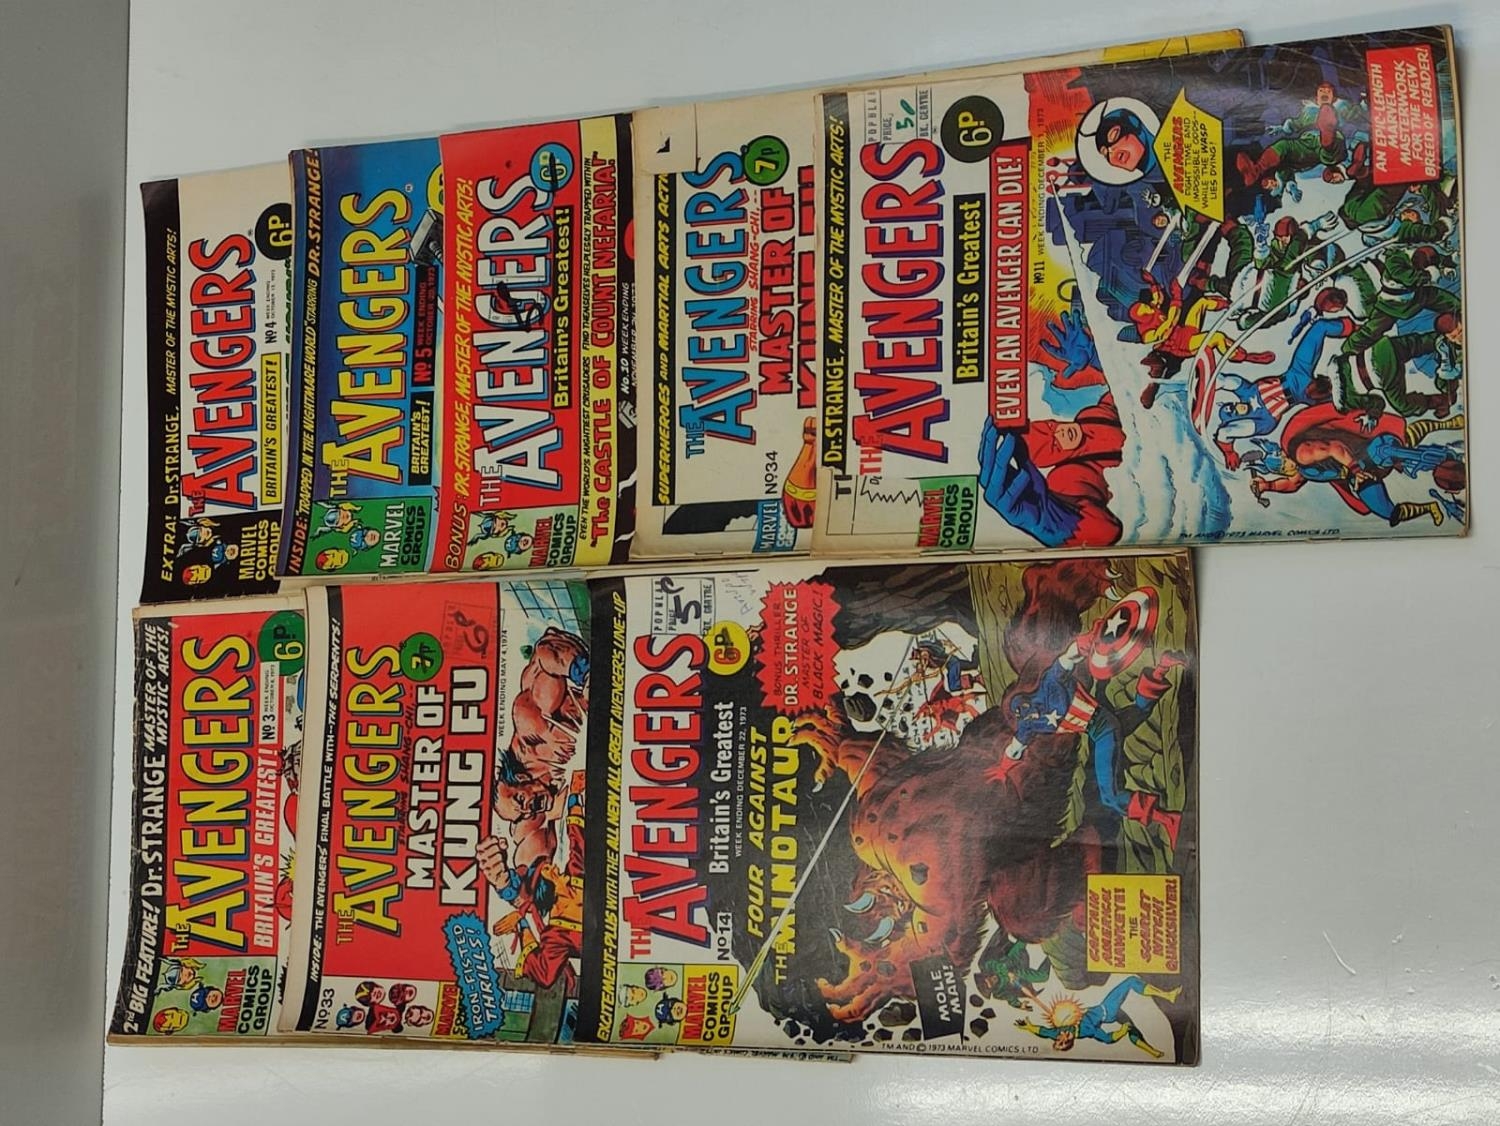 17 editions of Vintage 'The Avengers' Marvel Comics. - Image 10 of 12